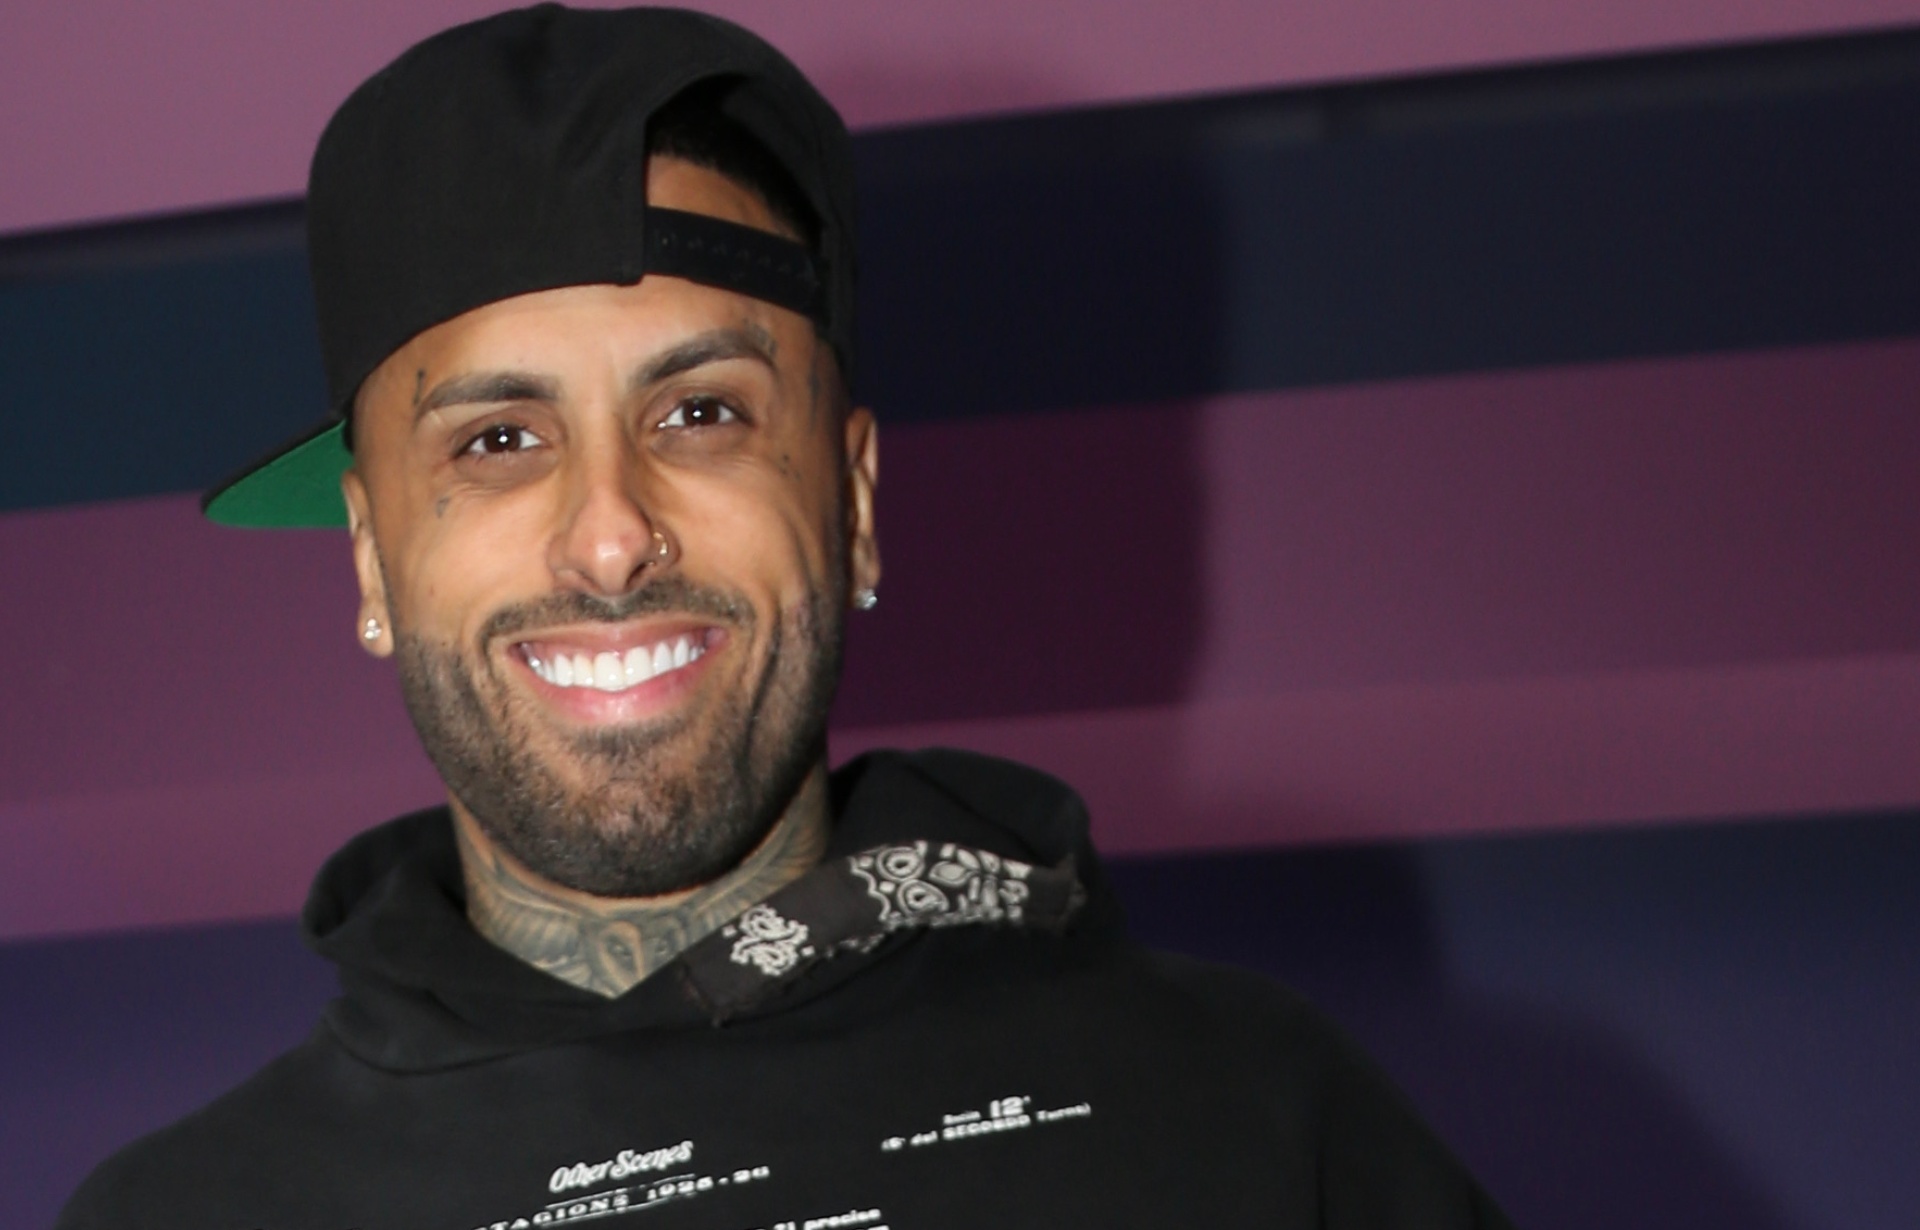 nicky-jam-with-a-new-girlfriend-while-aleska-genesis-talked-about-the-possibility-of-talking-to-him